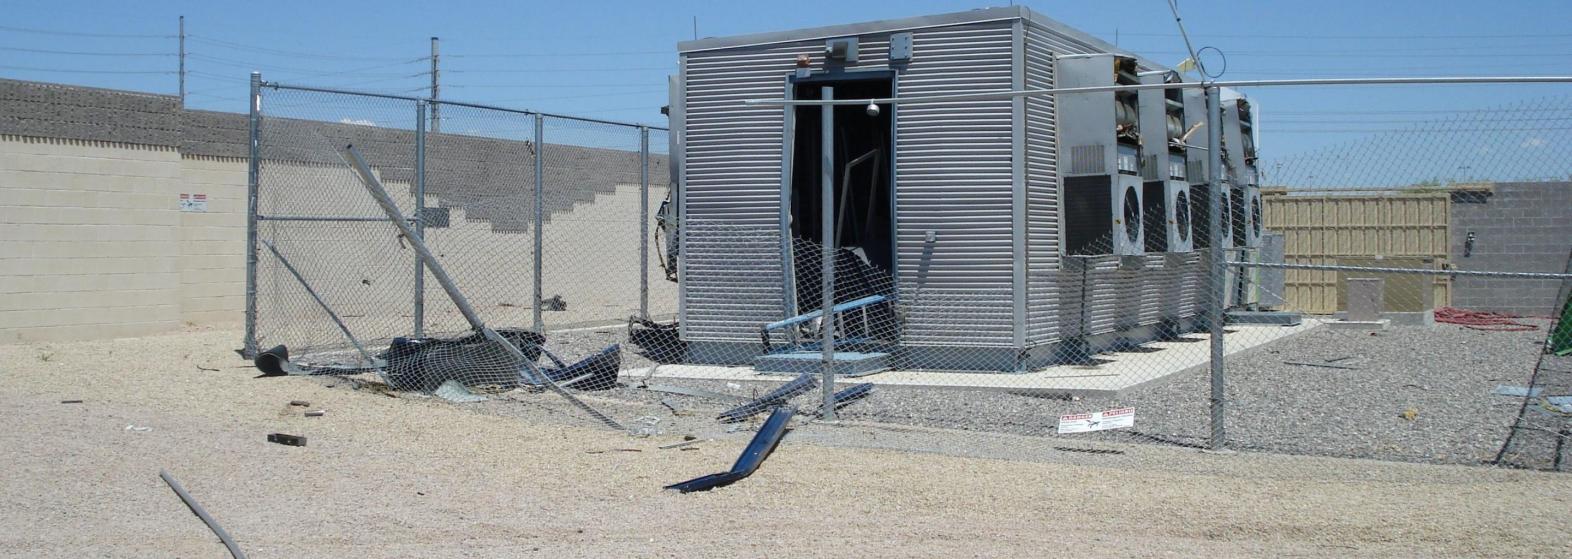 energy storage system with a broken fence and debris on the ground